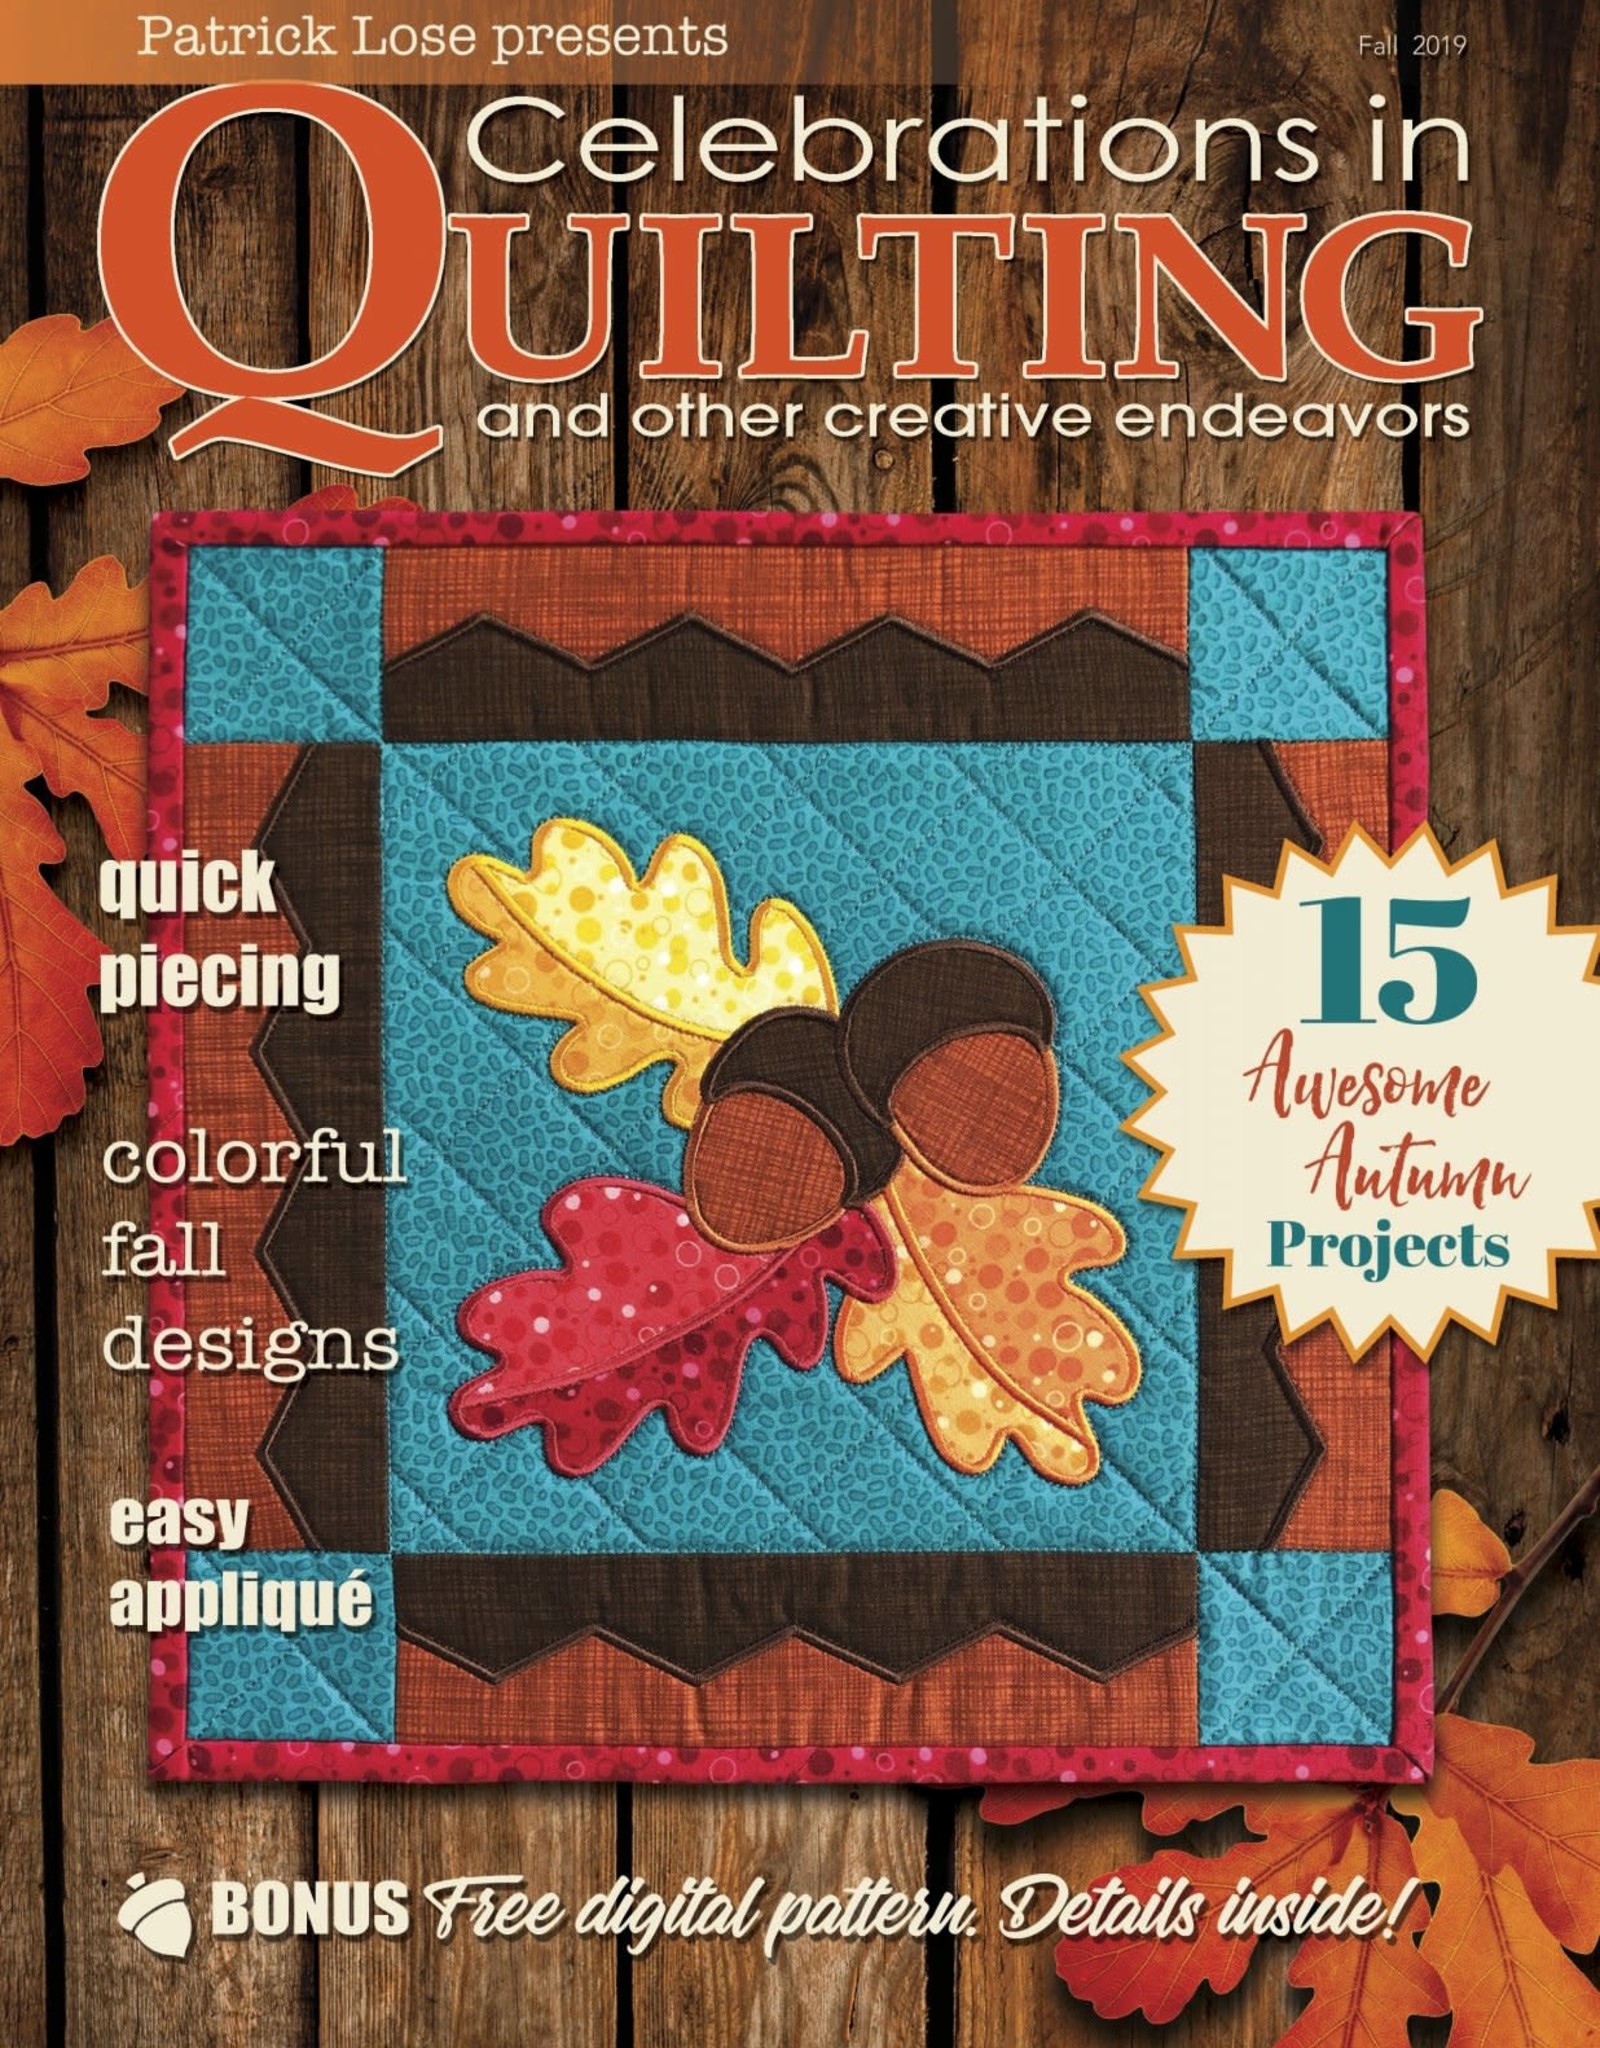 Patrick Lose Studio Celebrations in Quilting and Other Creative Endeavors